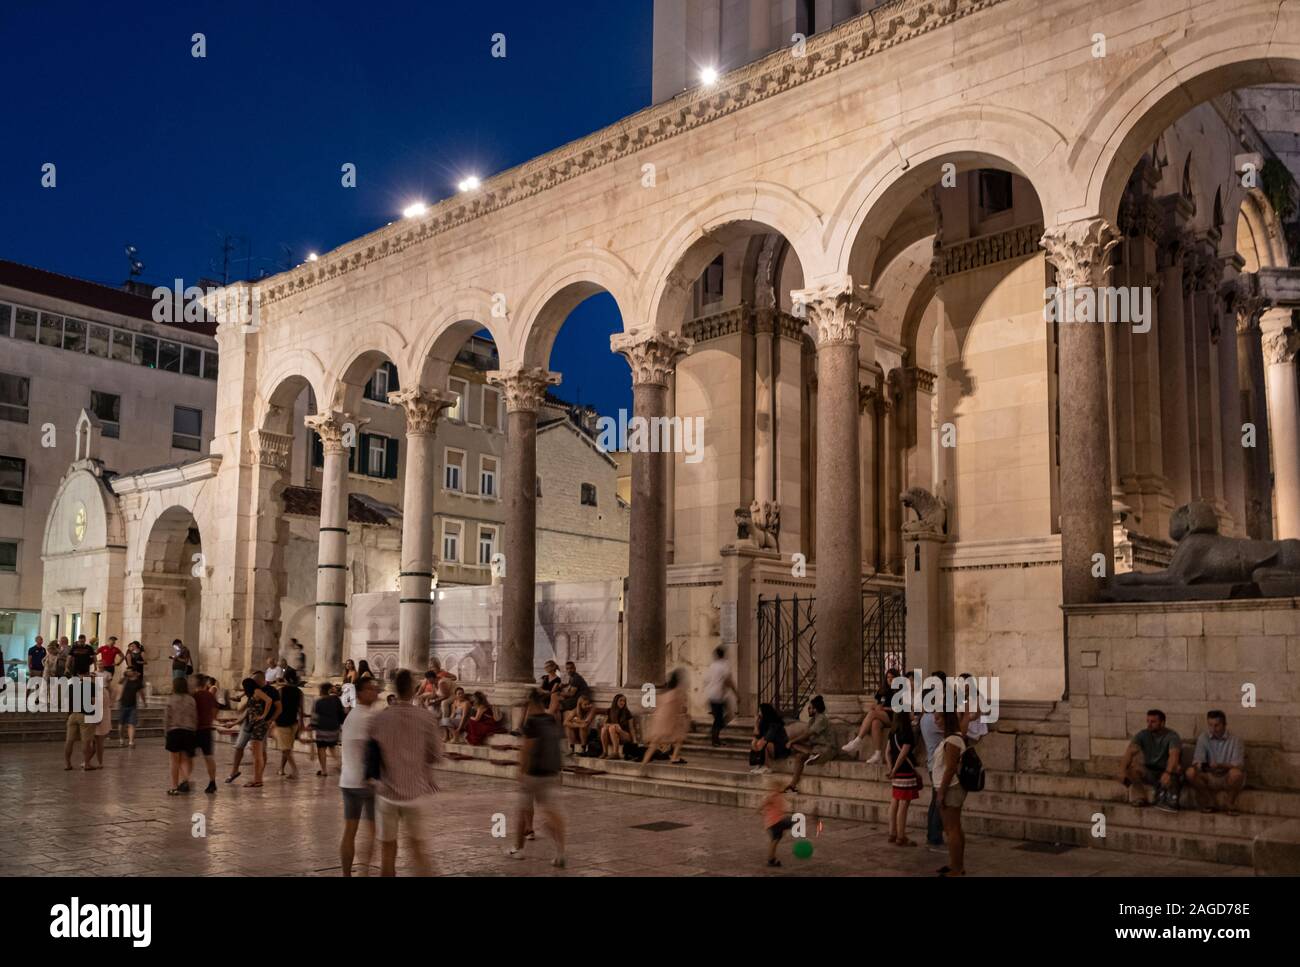 People drinking and exploring the plaza inside Diocletian's Palace at night, Split, Croatia Stock Photo